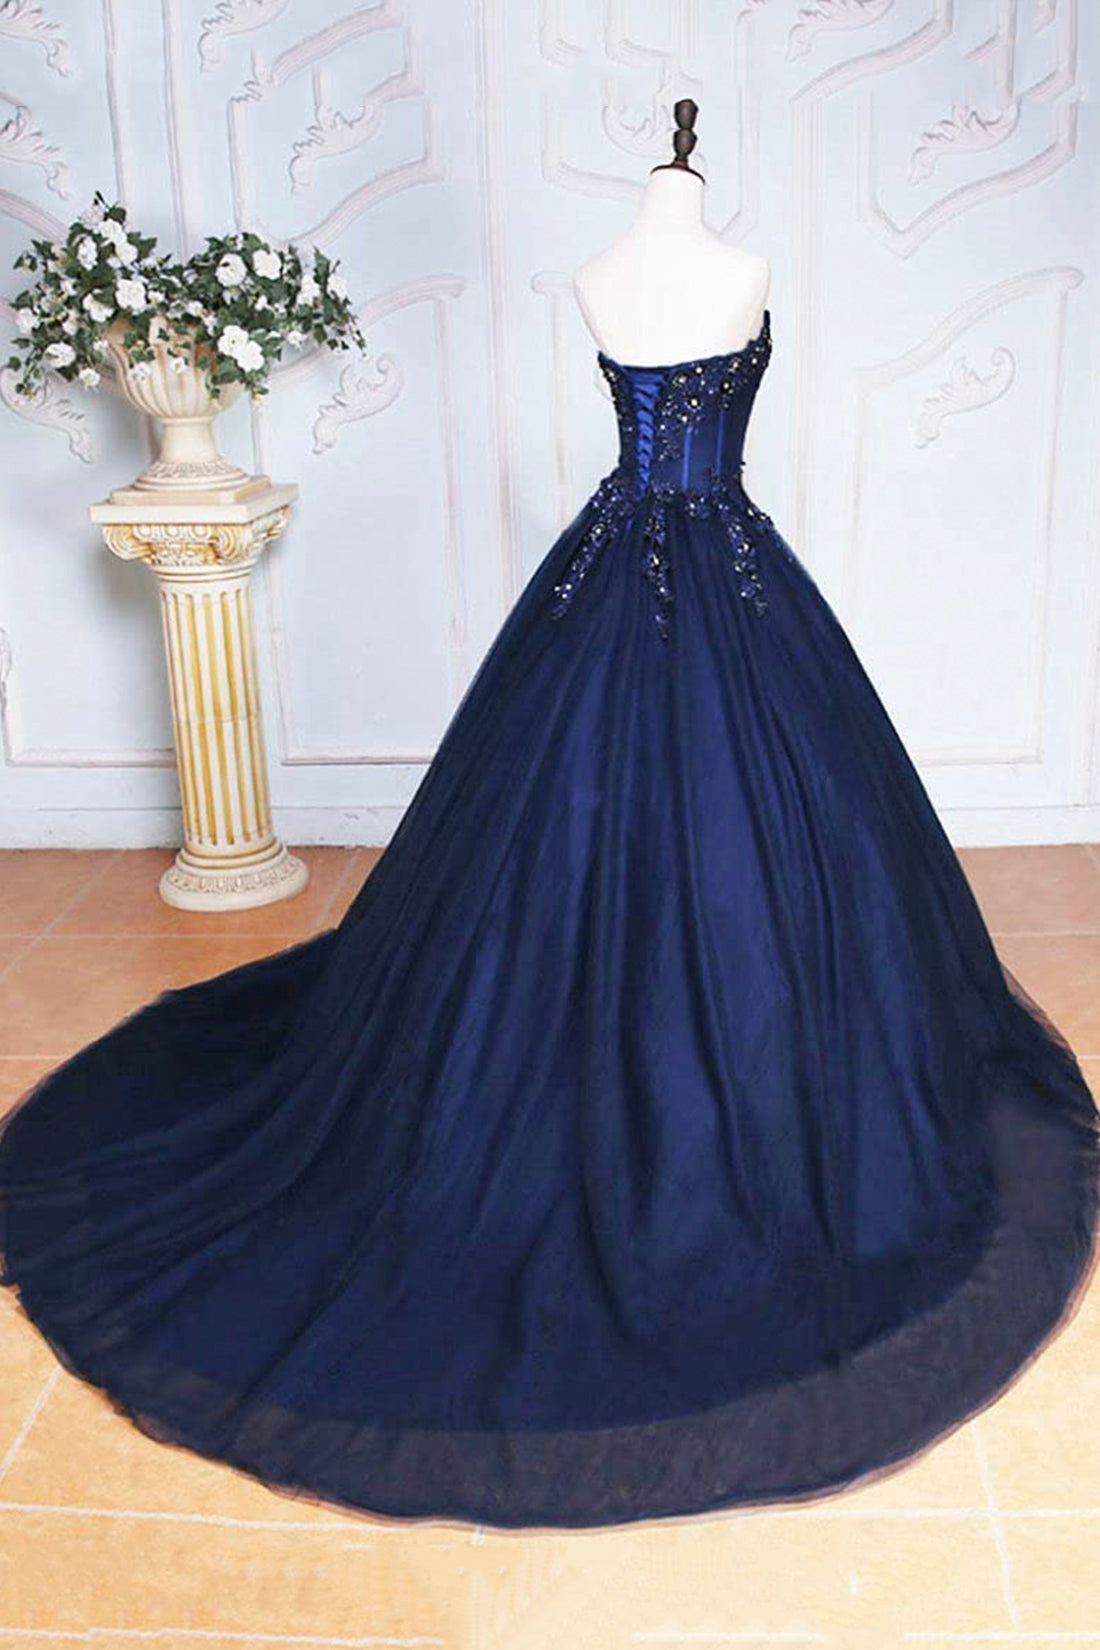 Party Dress Over 40, Dark Blue Tulle Lace Princess Dress, A-Line Strapless Long Prom Dress